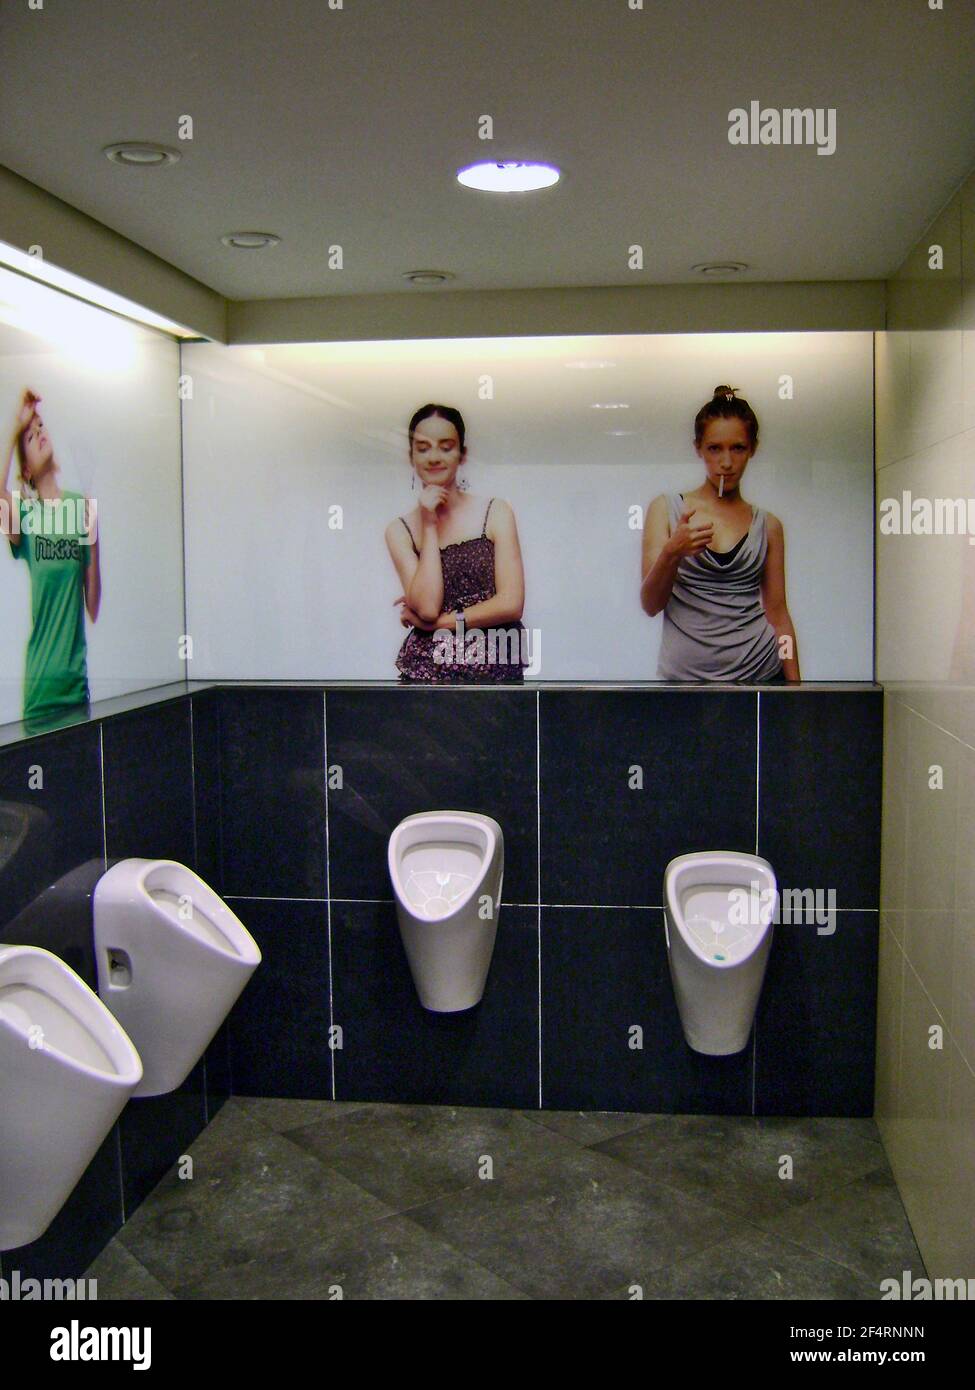 Praha, Czech Republic, April 28, 2010. Toilet in a restaurant with interesting photos on the wall. Stock Photo